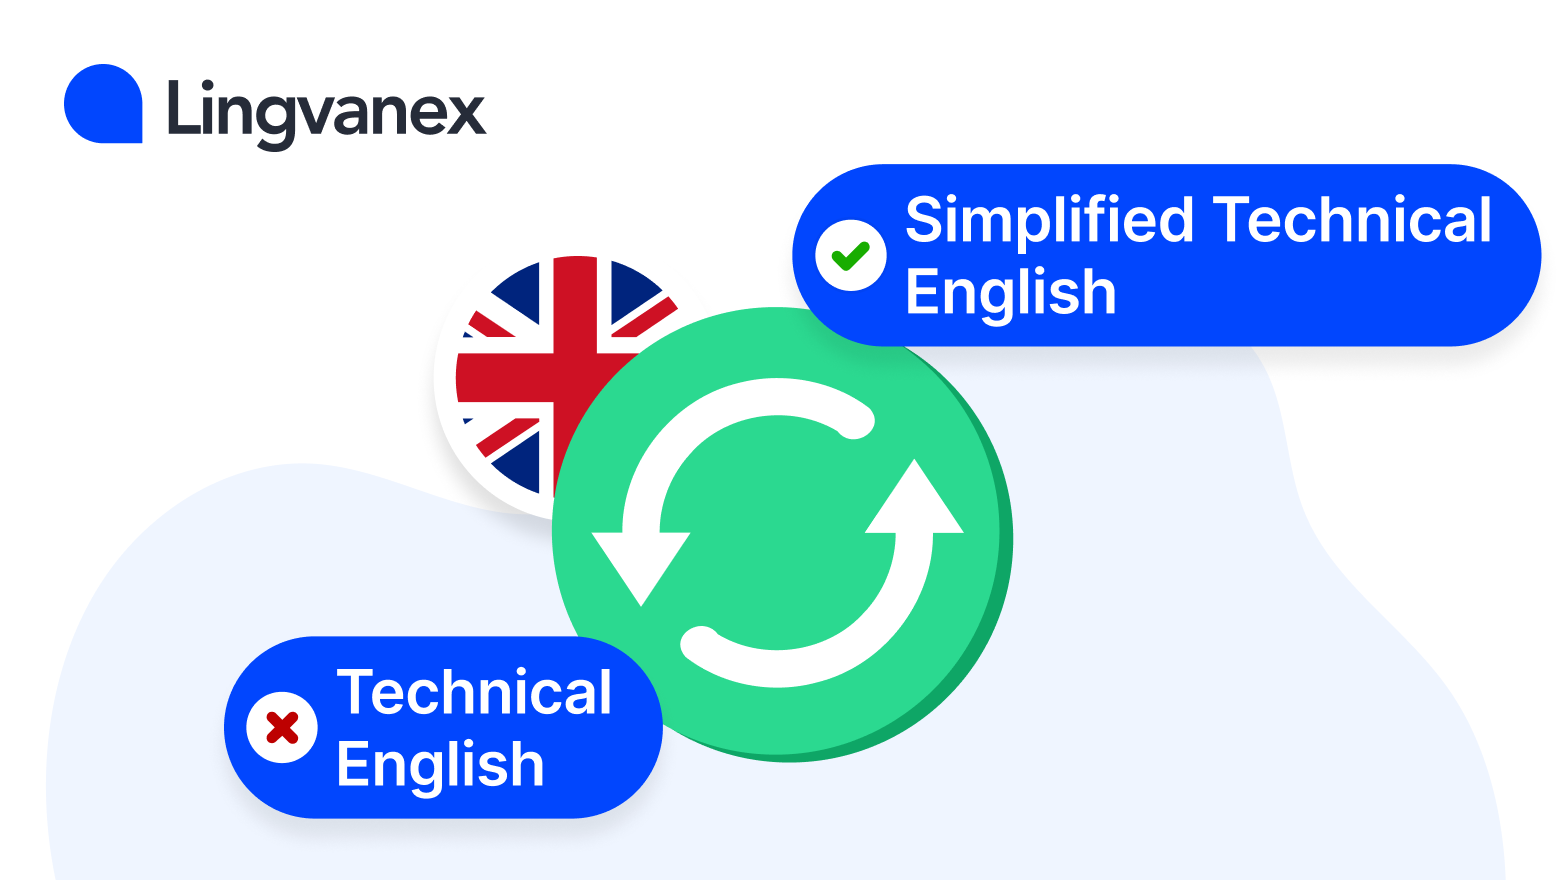 Simplified Technical English (STE)